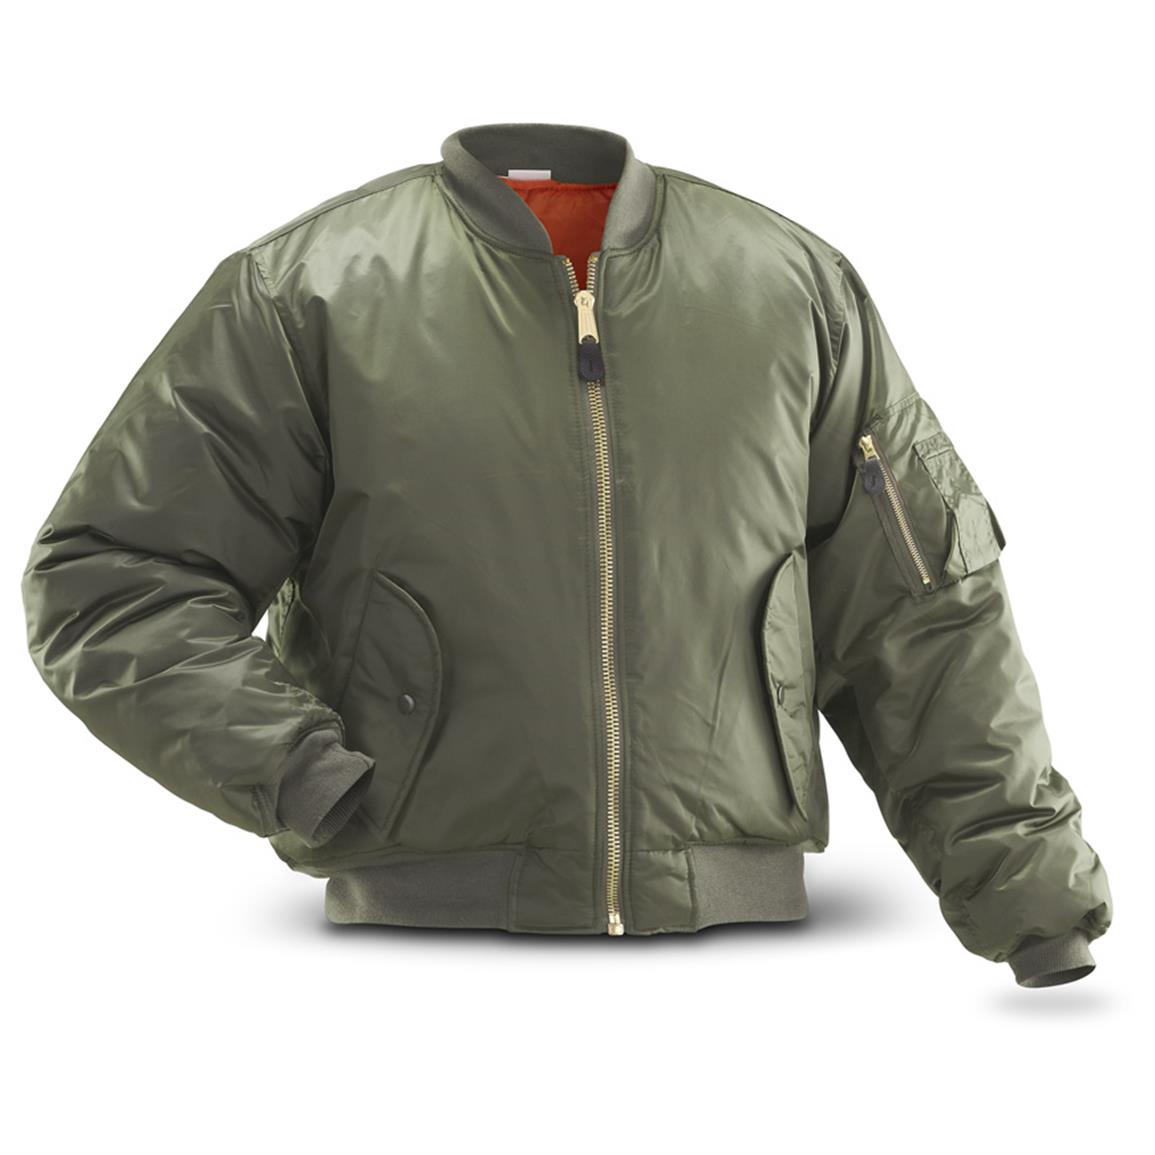 Mil-style MA-1 Flight Jacket - 75817, Tactical Clothing at Sportsman's ...